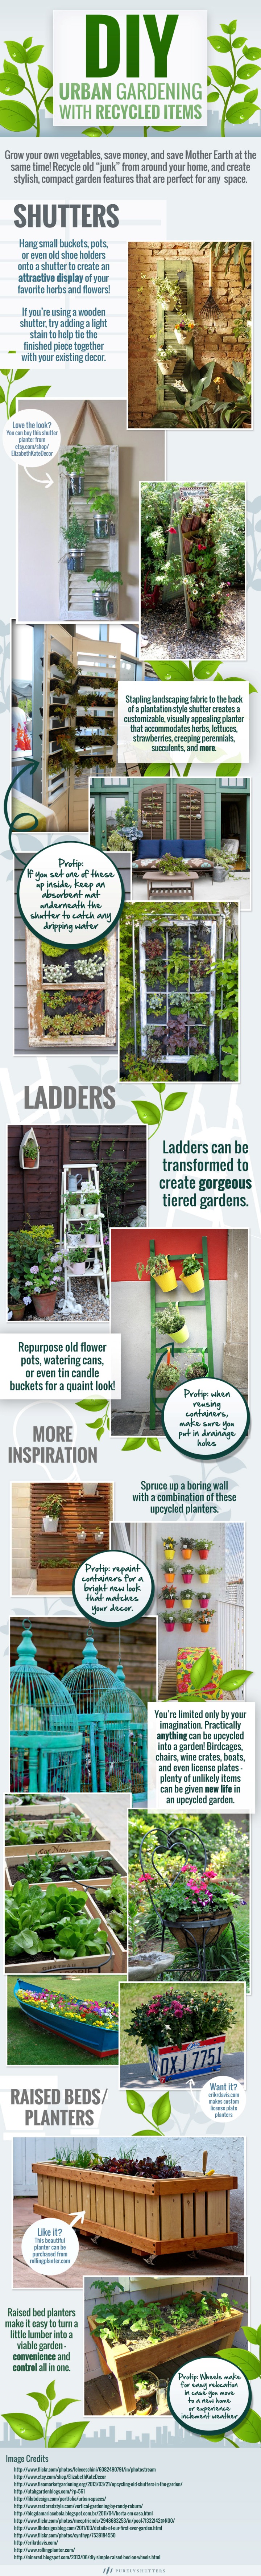 Infographic: Urban Gardening with Upcycling